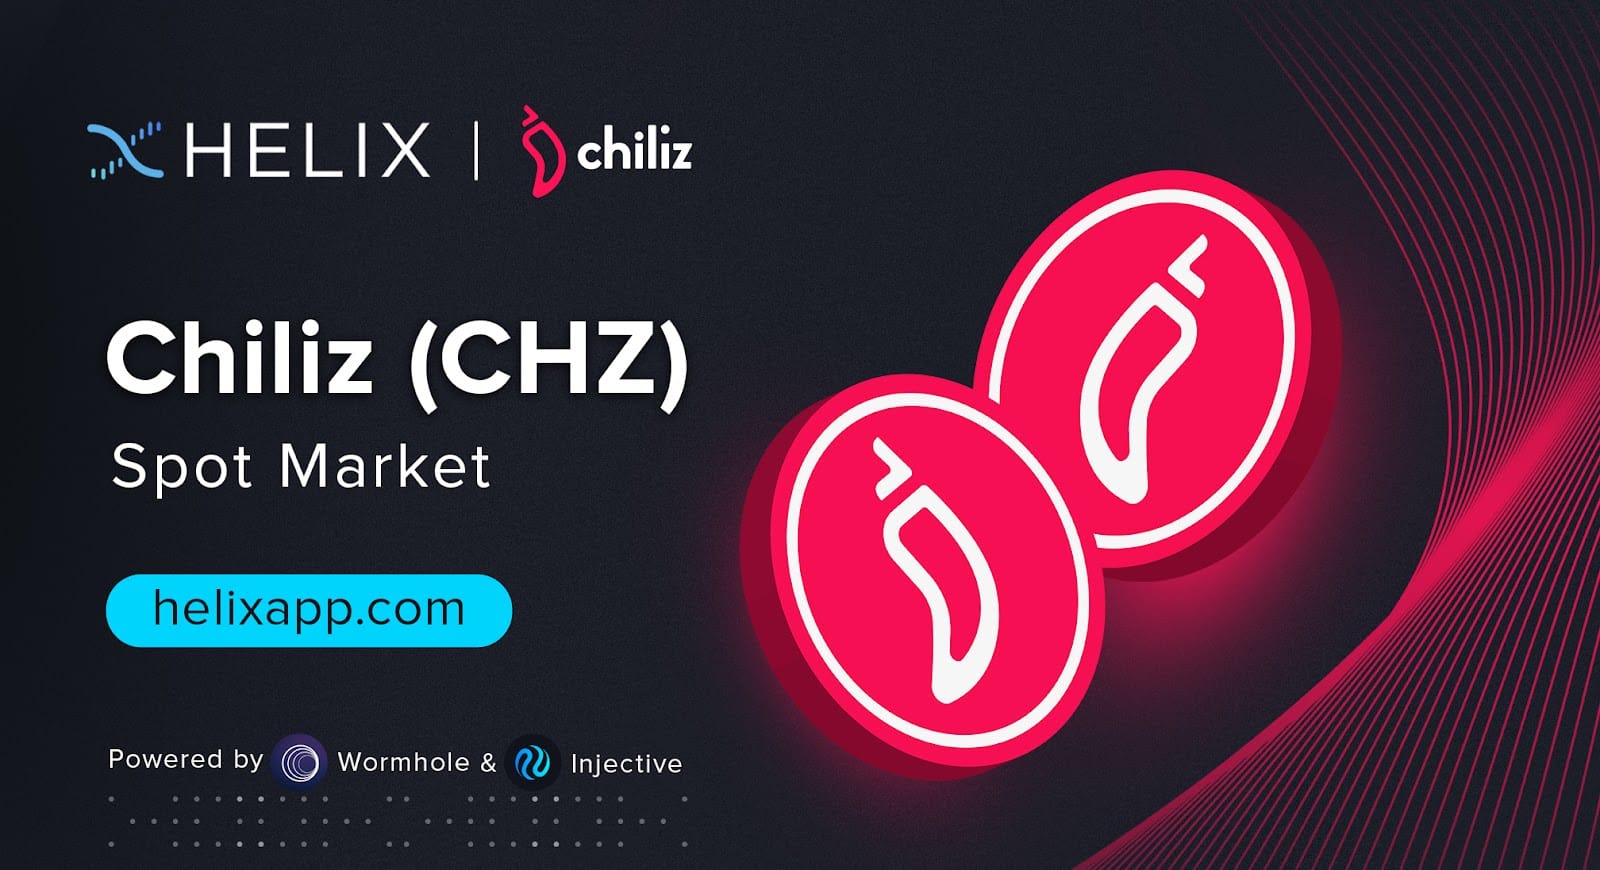 Chiliz ($CHZ), the Token Powering the Leading Web3 Ecosystem for Sports, Listing on Helix